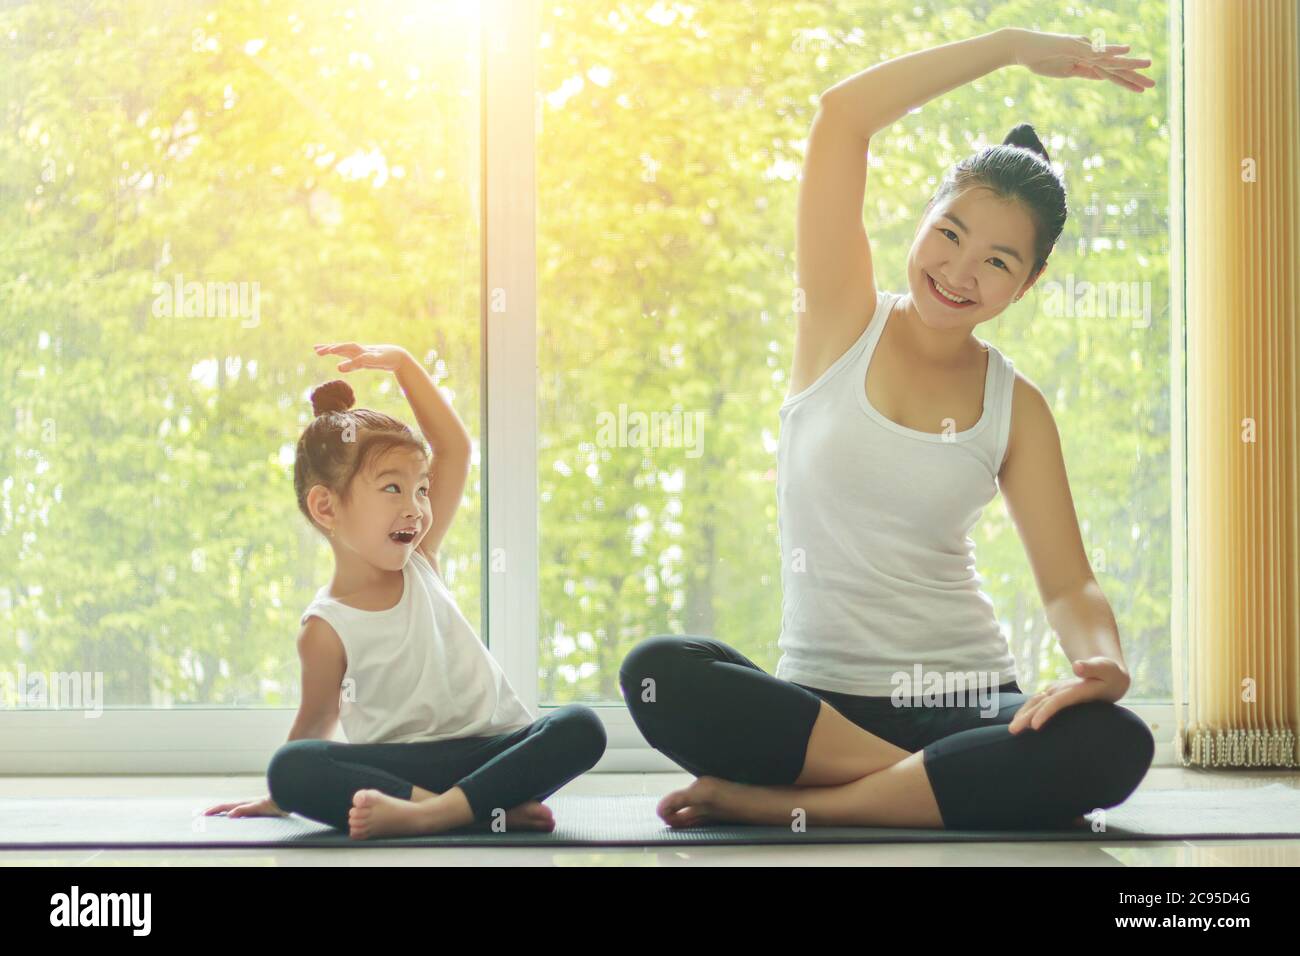 Asian mom practice yoga at home with a adorable daughter sitting next to her, trying to imitate the mother's posture with a smiling face Stock Photo